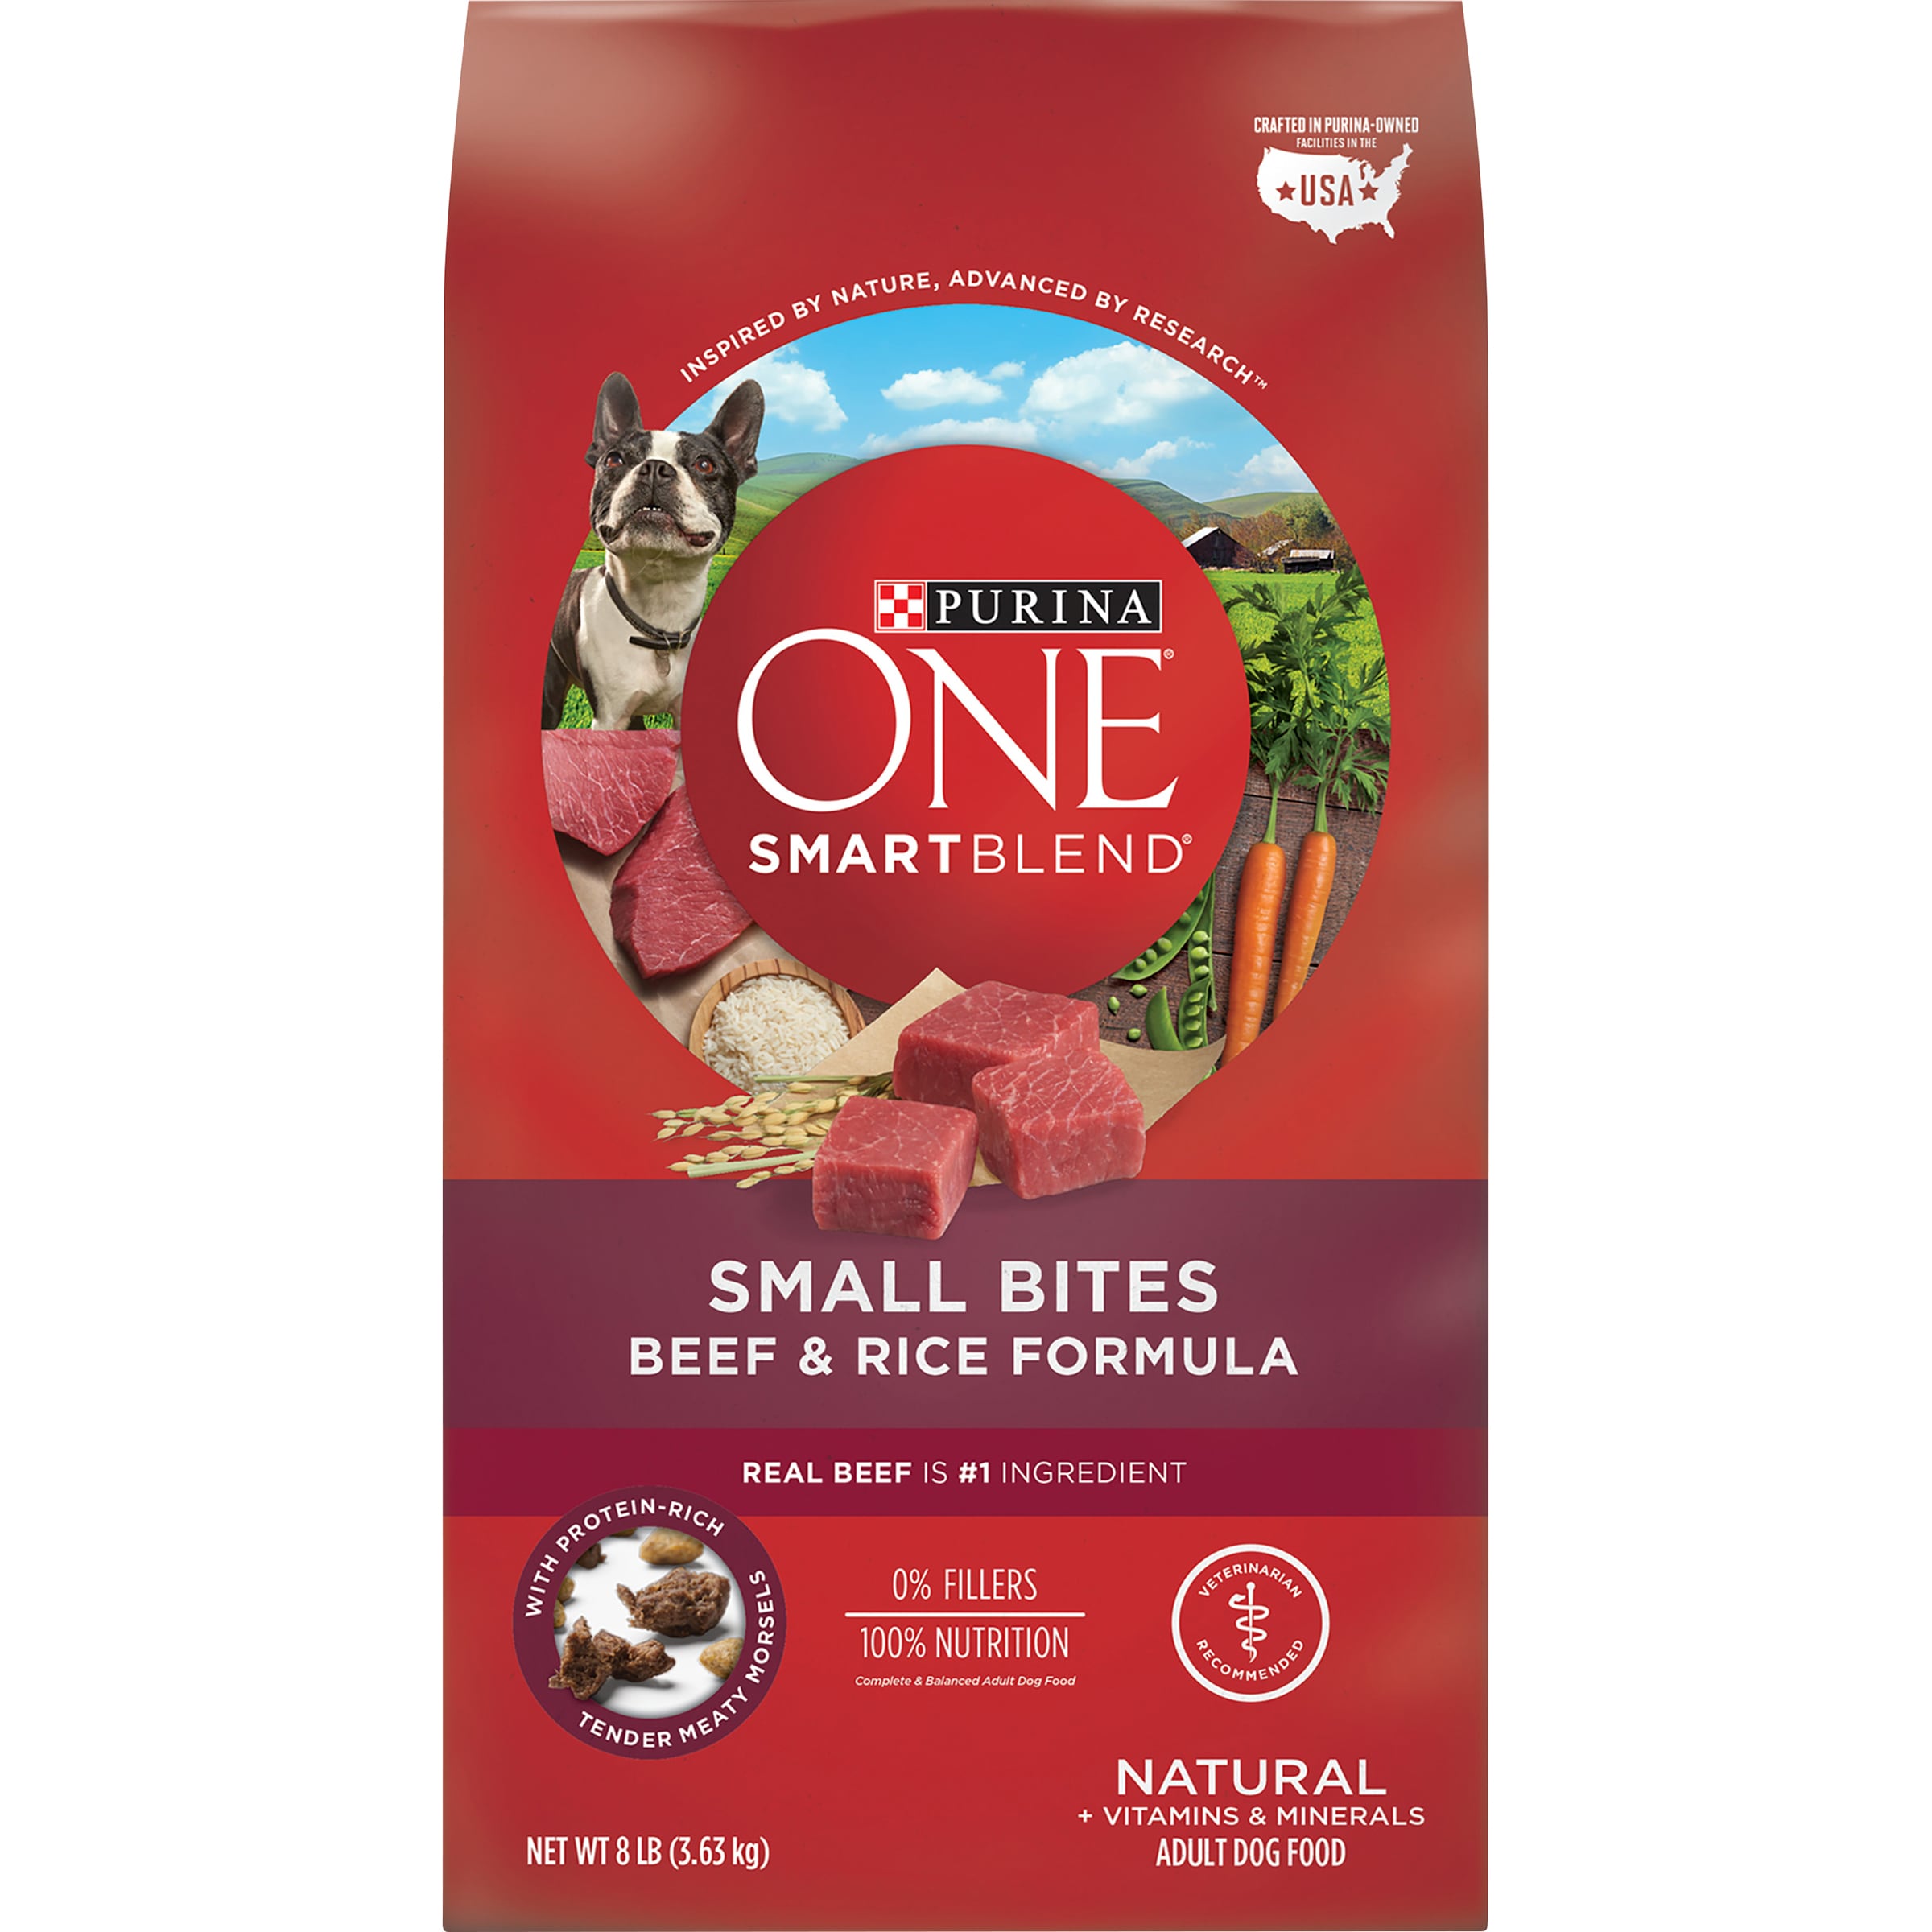 Nestle Purina Adult Beef Food 8 oz in Pet Food department at Lowes.com